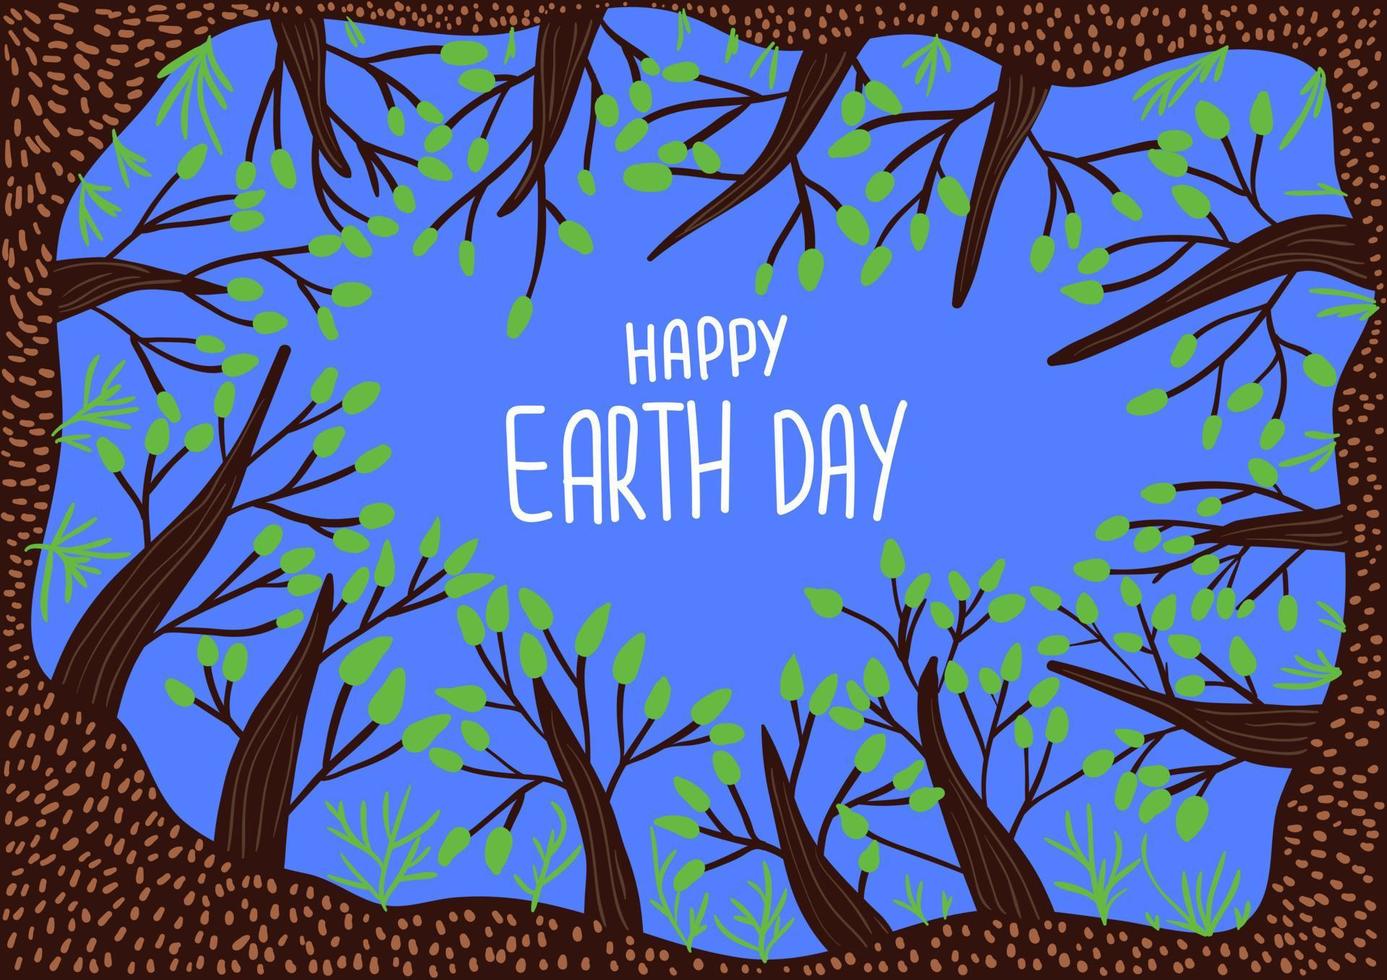 Happy Earth Day poster. Vector illustration with trees and leaves. Circle of trees